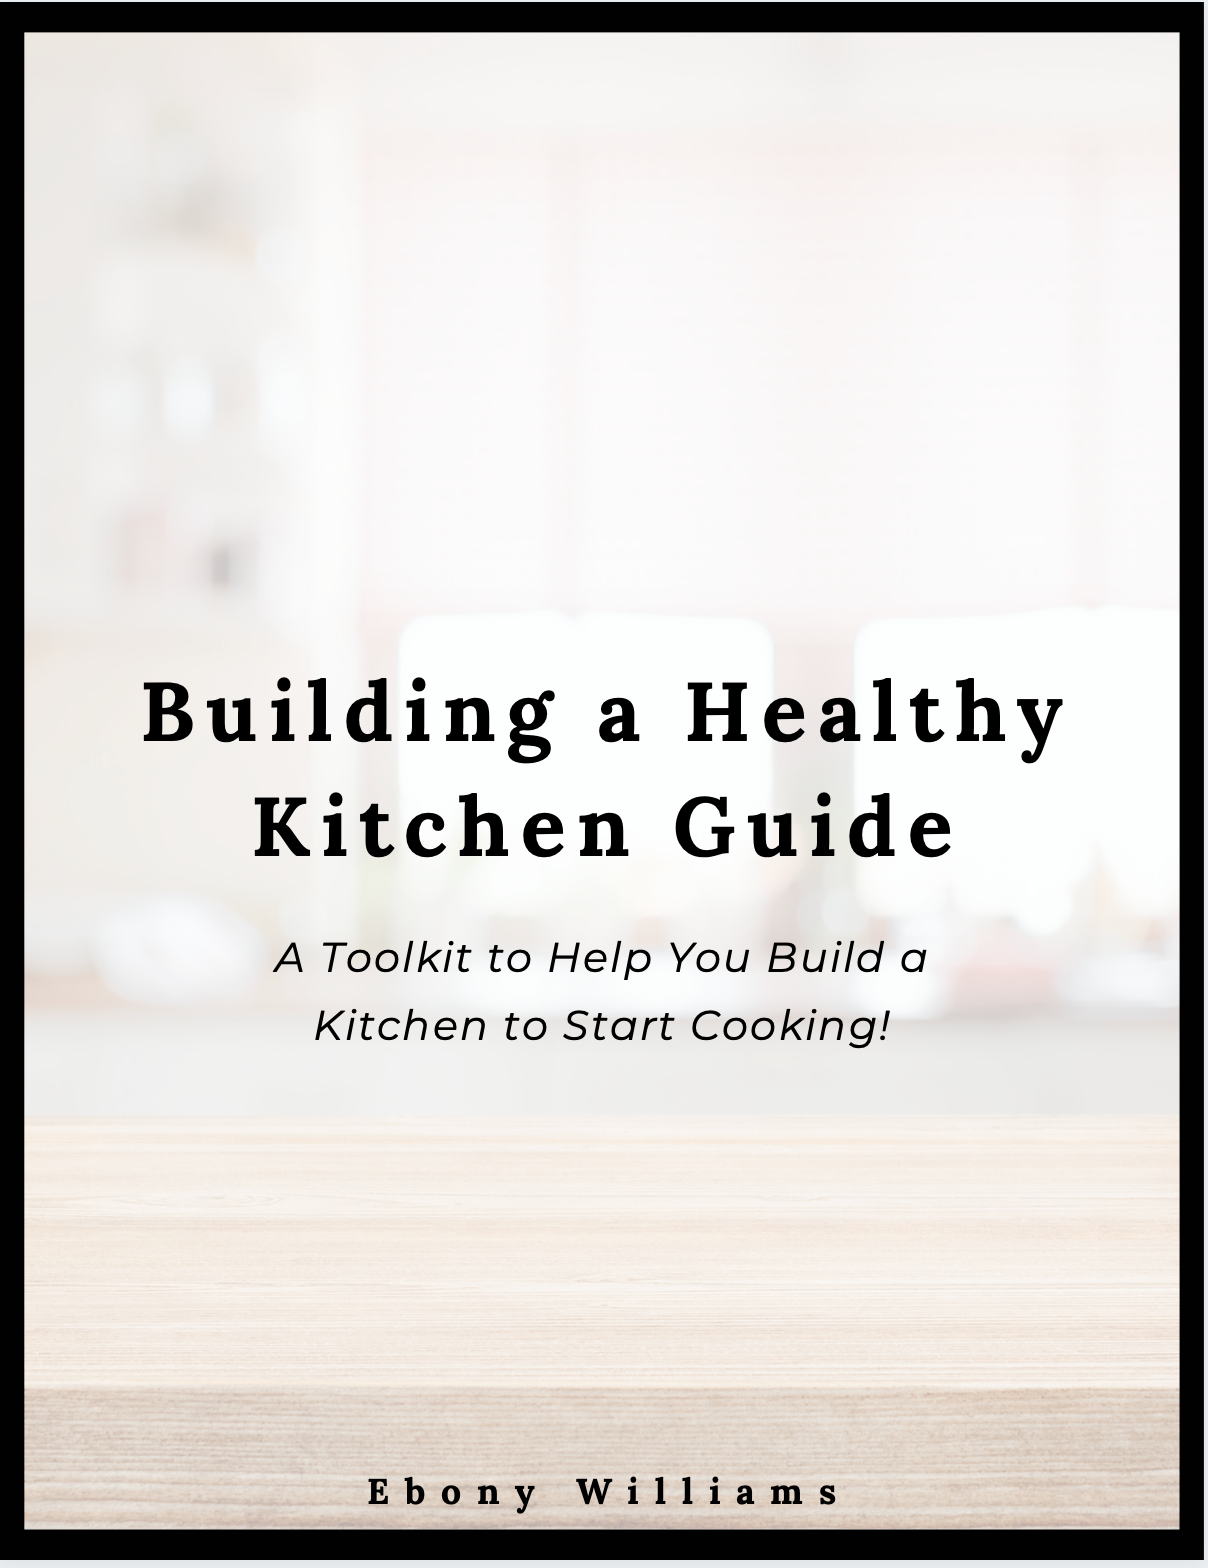 Building a Healthy Kitchen Guide